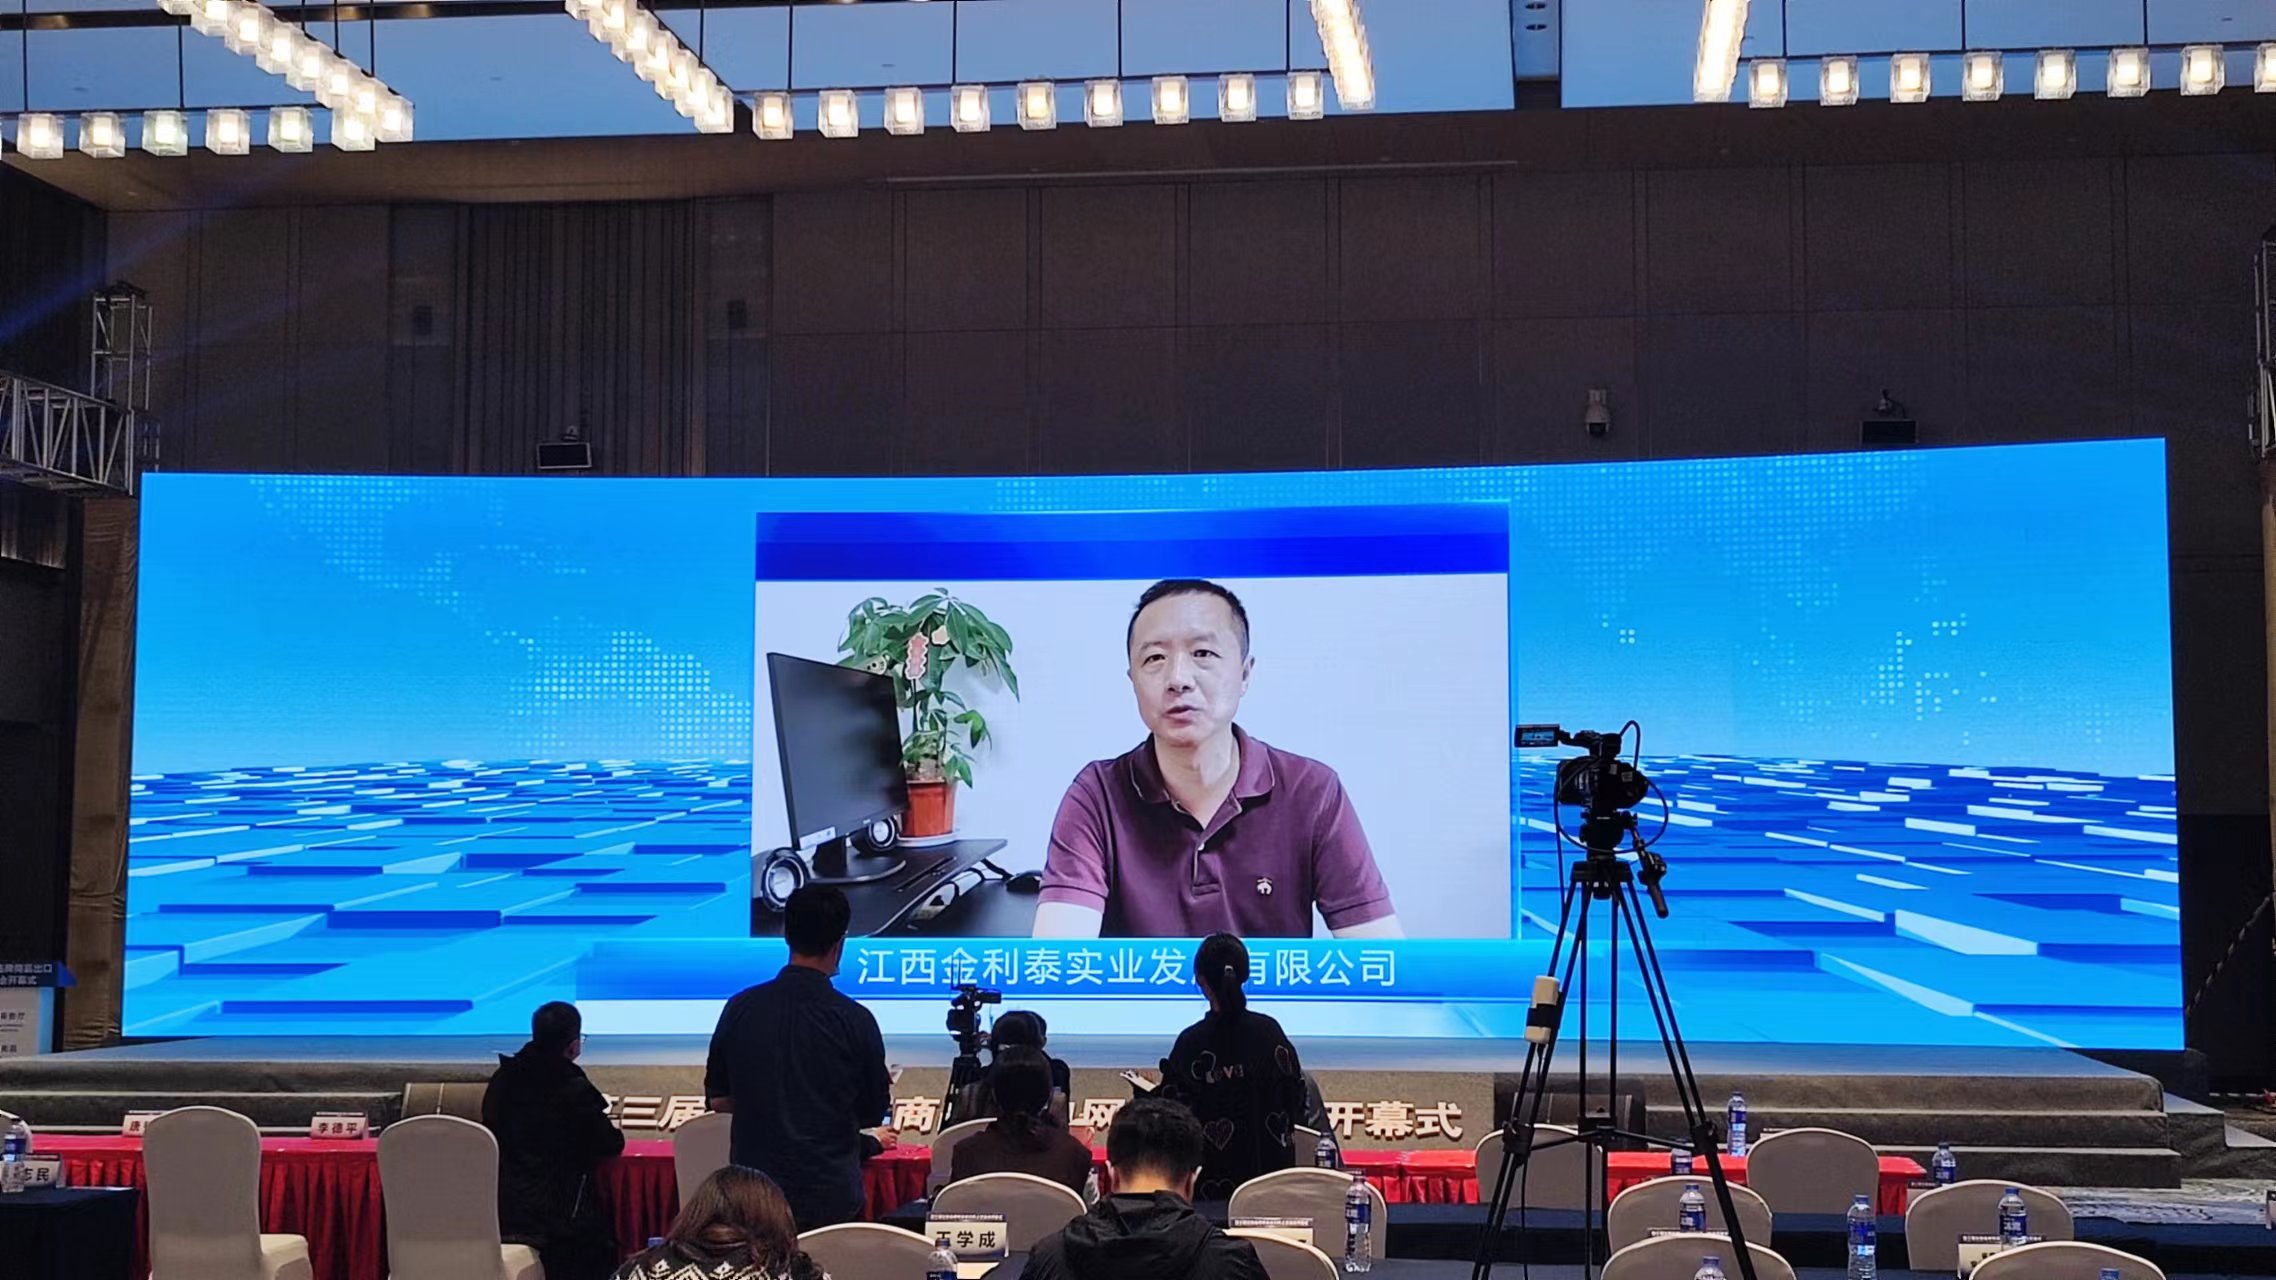 KLT Participates in the 3rd Jiangxi Brand Products Export Online Exhibition